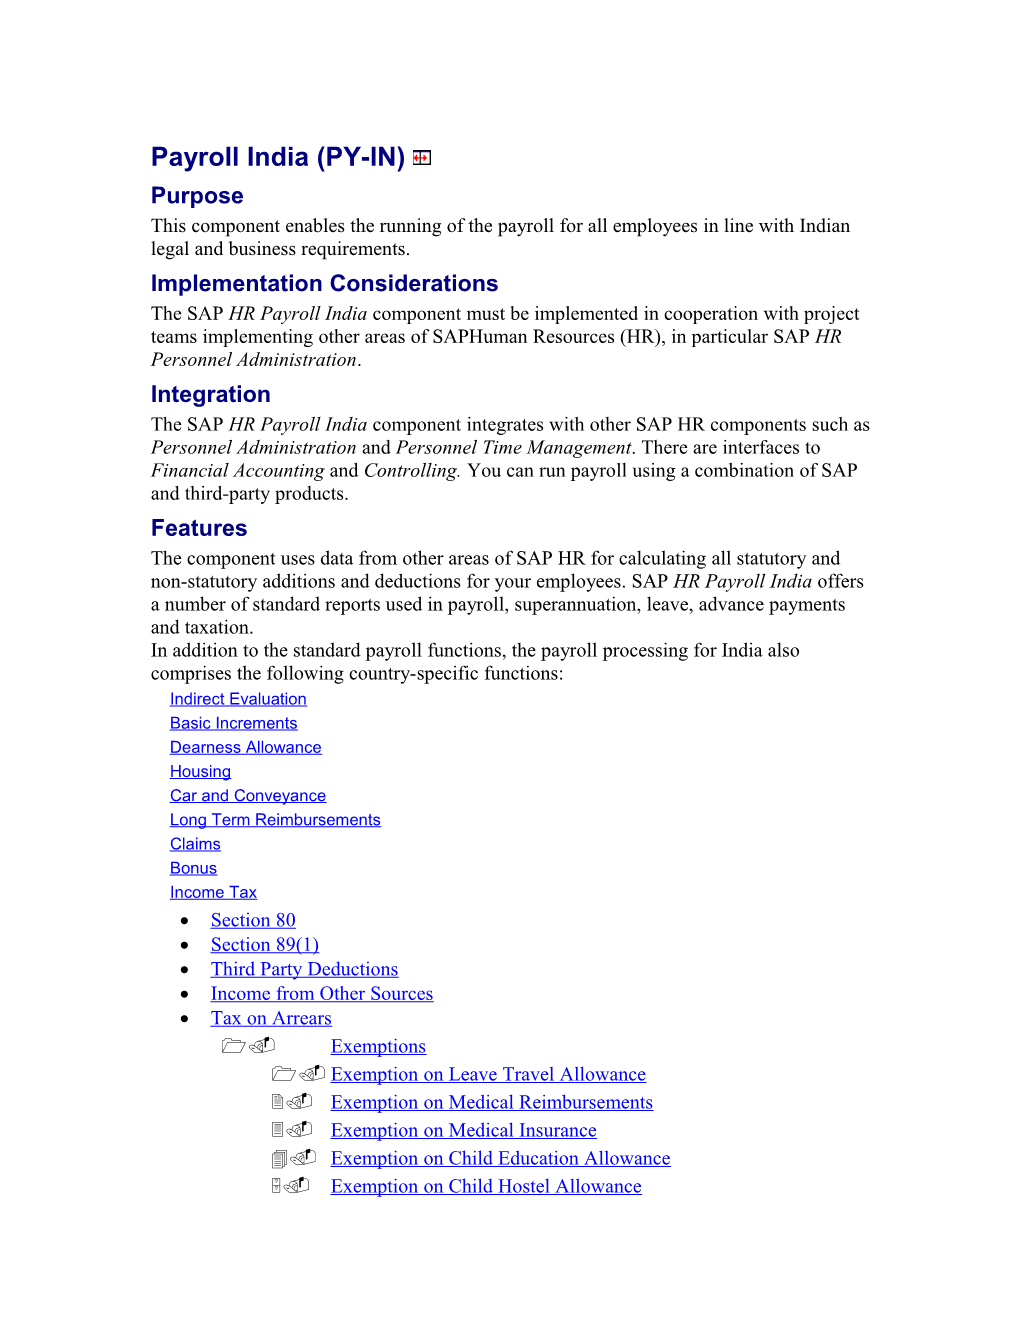 Payroll India (PY-IN)